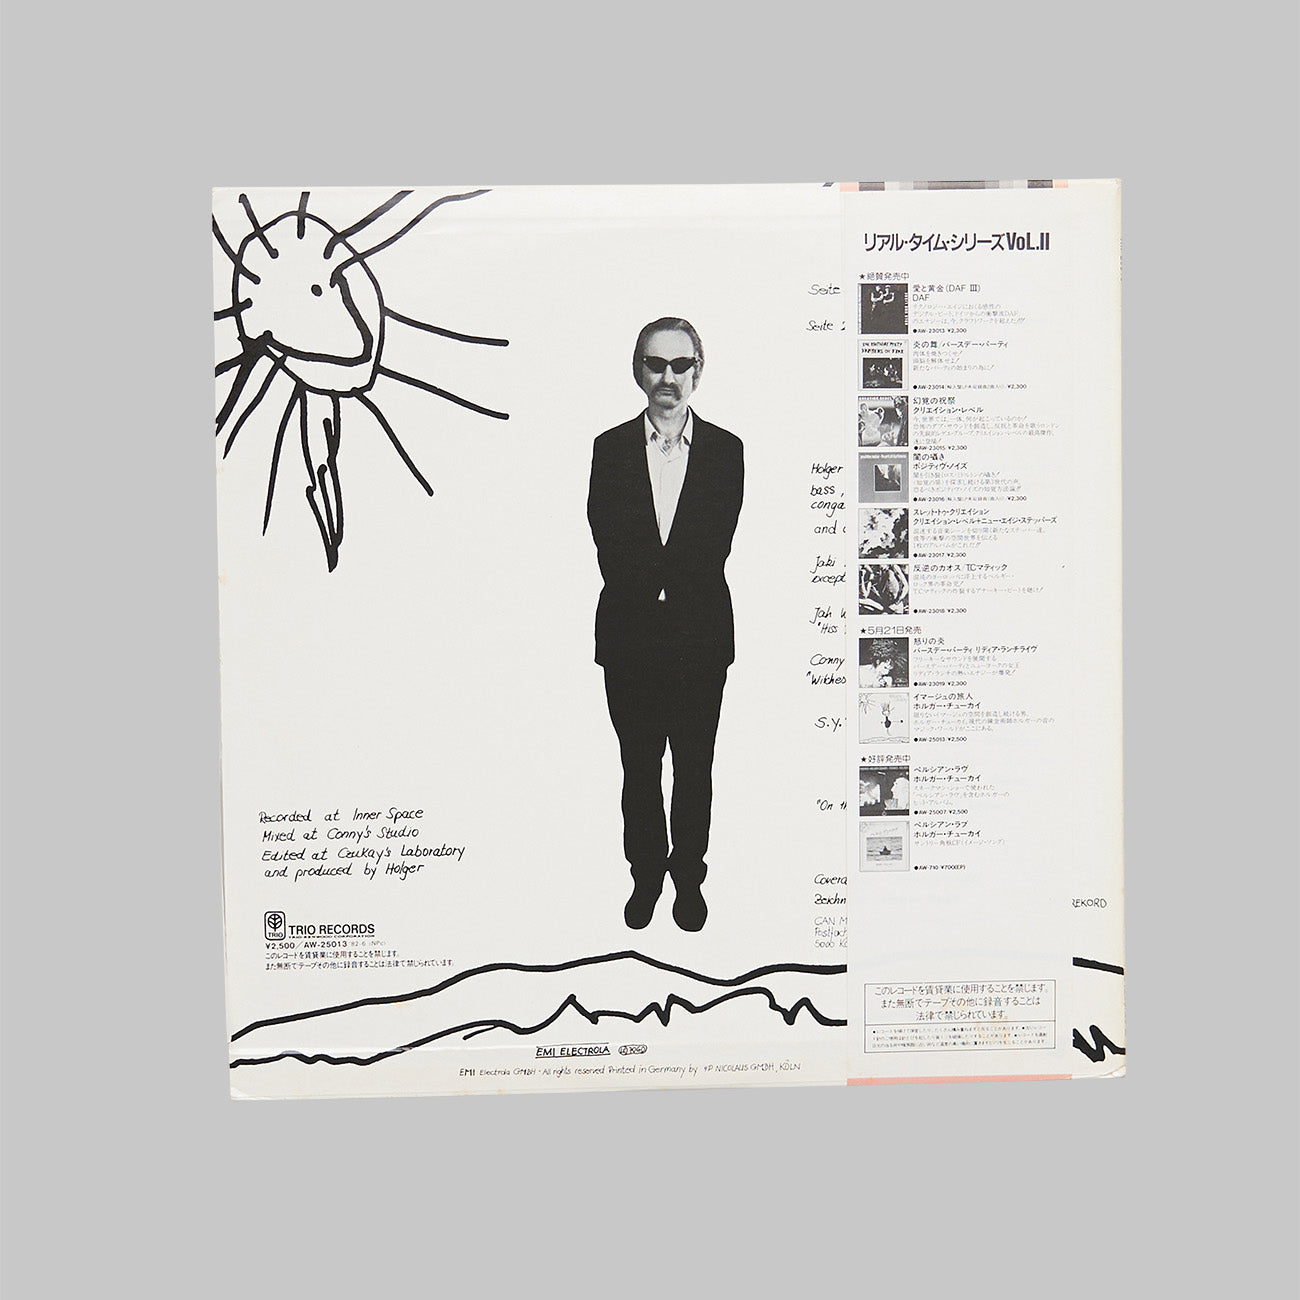 HOLGER CZUKAY / ON THE WAY TO THE PEAK OF NORMAL